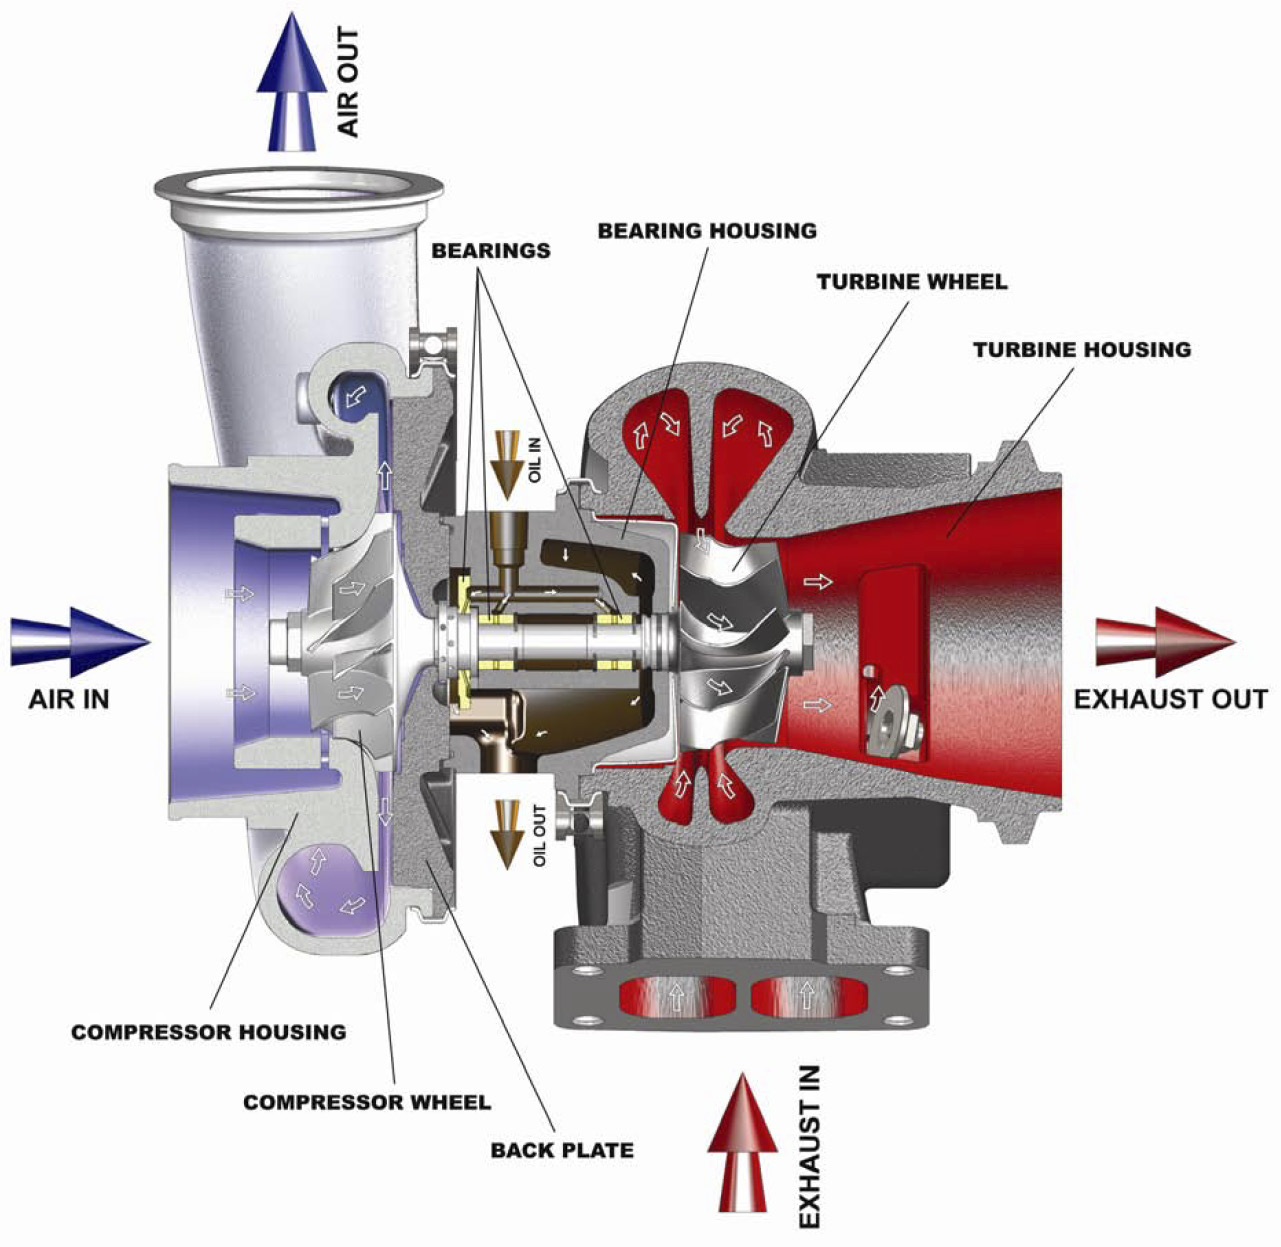 Installing A Turbocharger How A Car Works - Riset